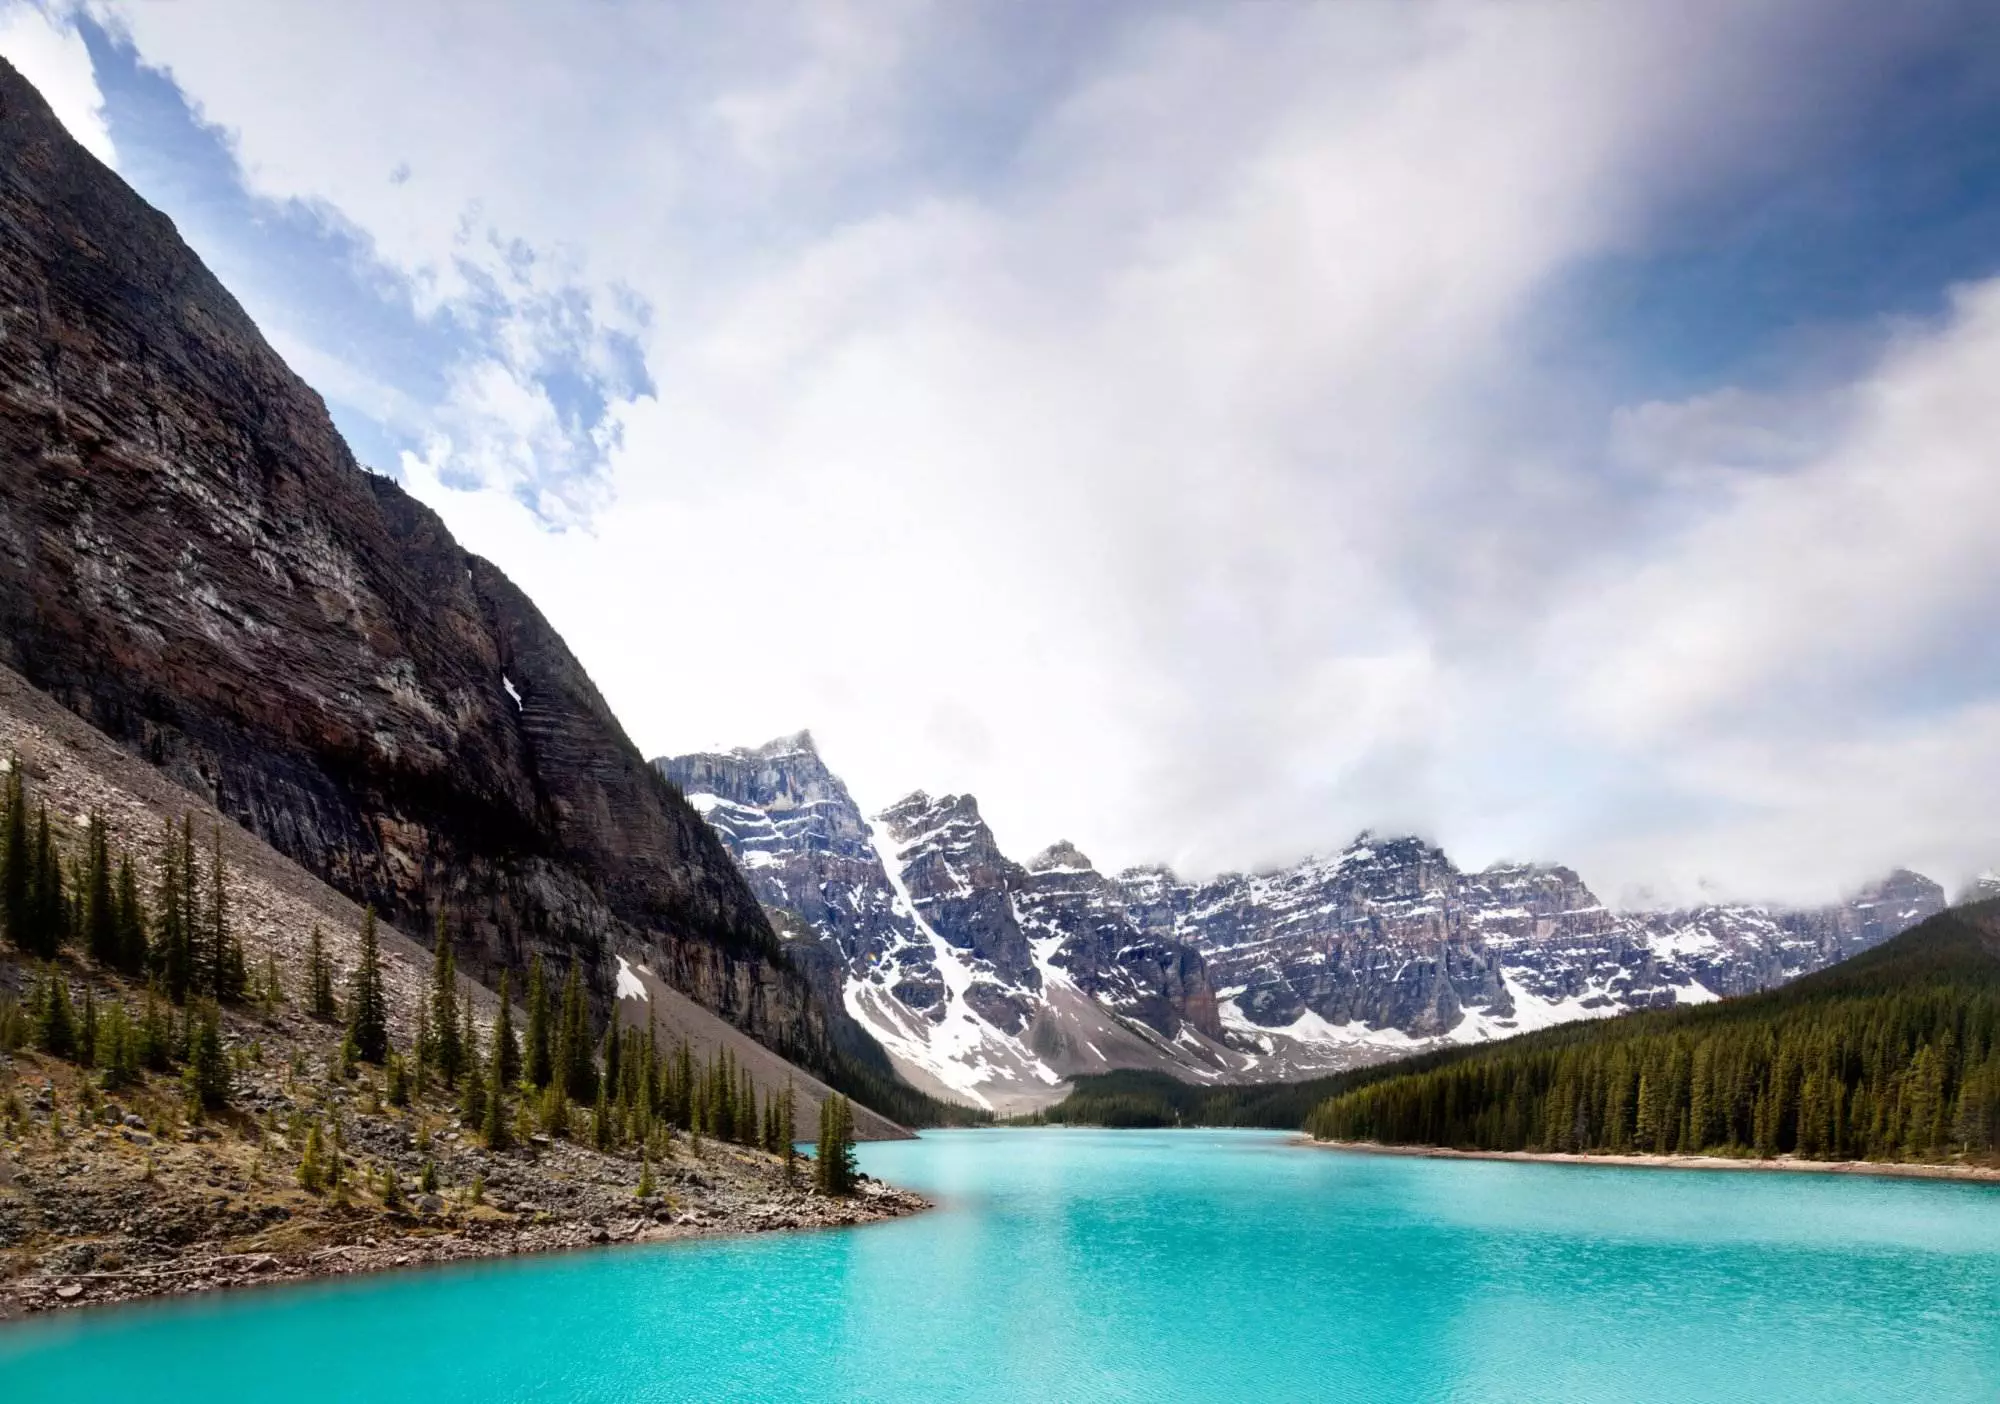 Landscape view of the Moraine Lake with mountains and turquoise waterbody in Banff National Park in Canada